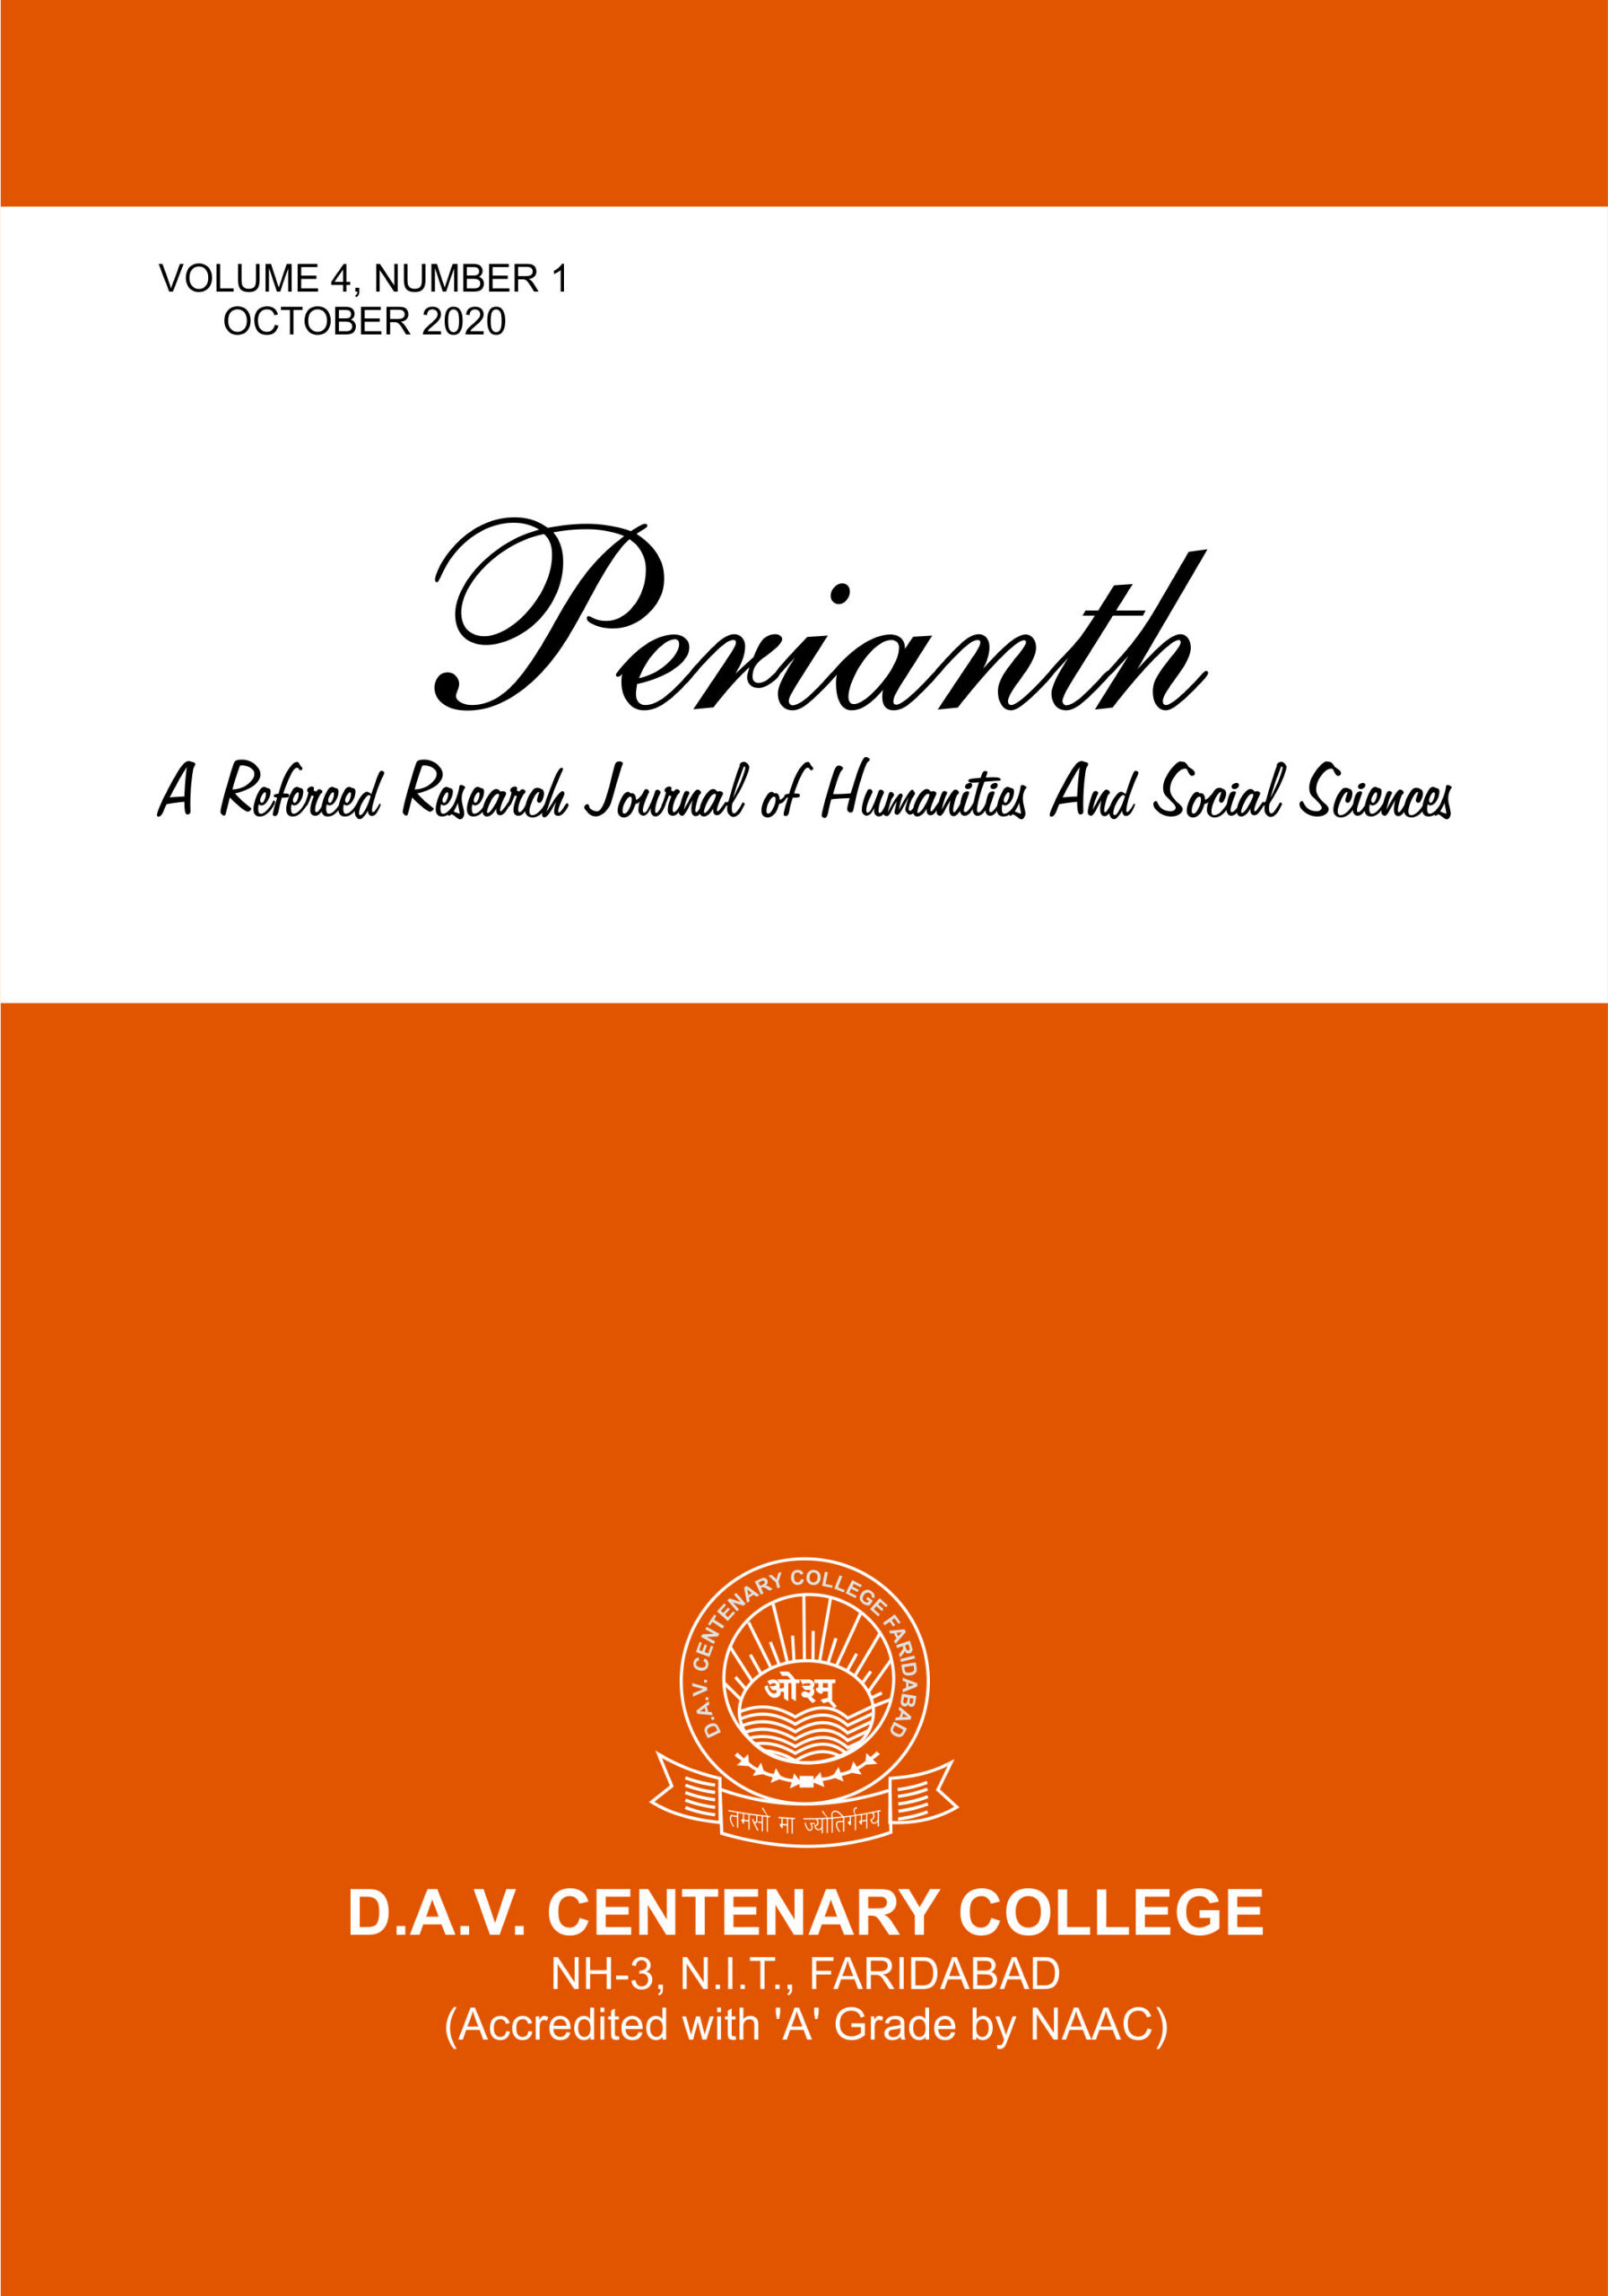 About Perianth(Volume 4, Issue 1)